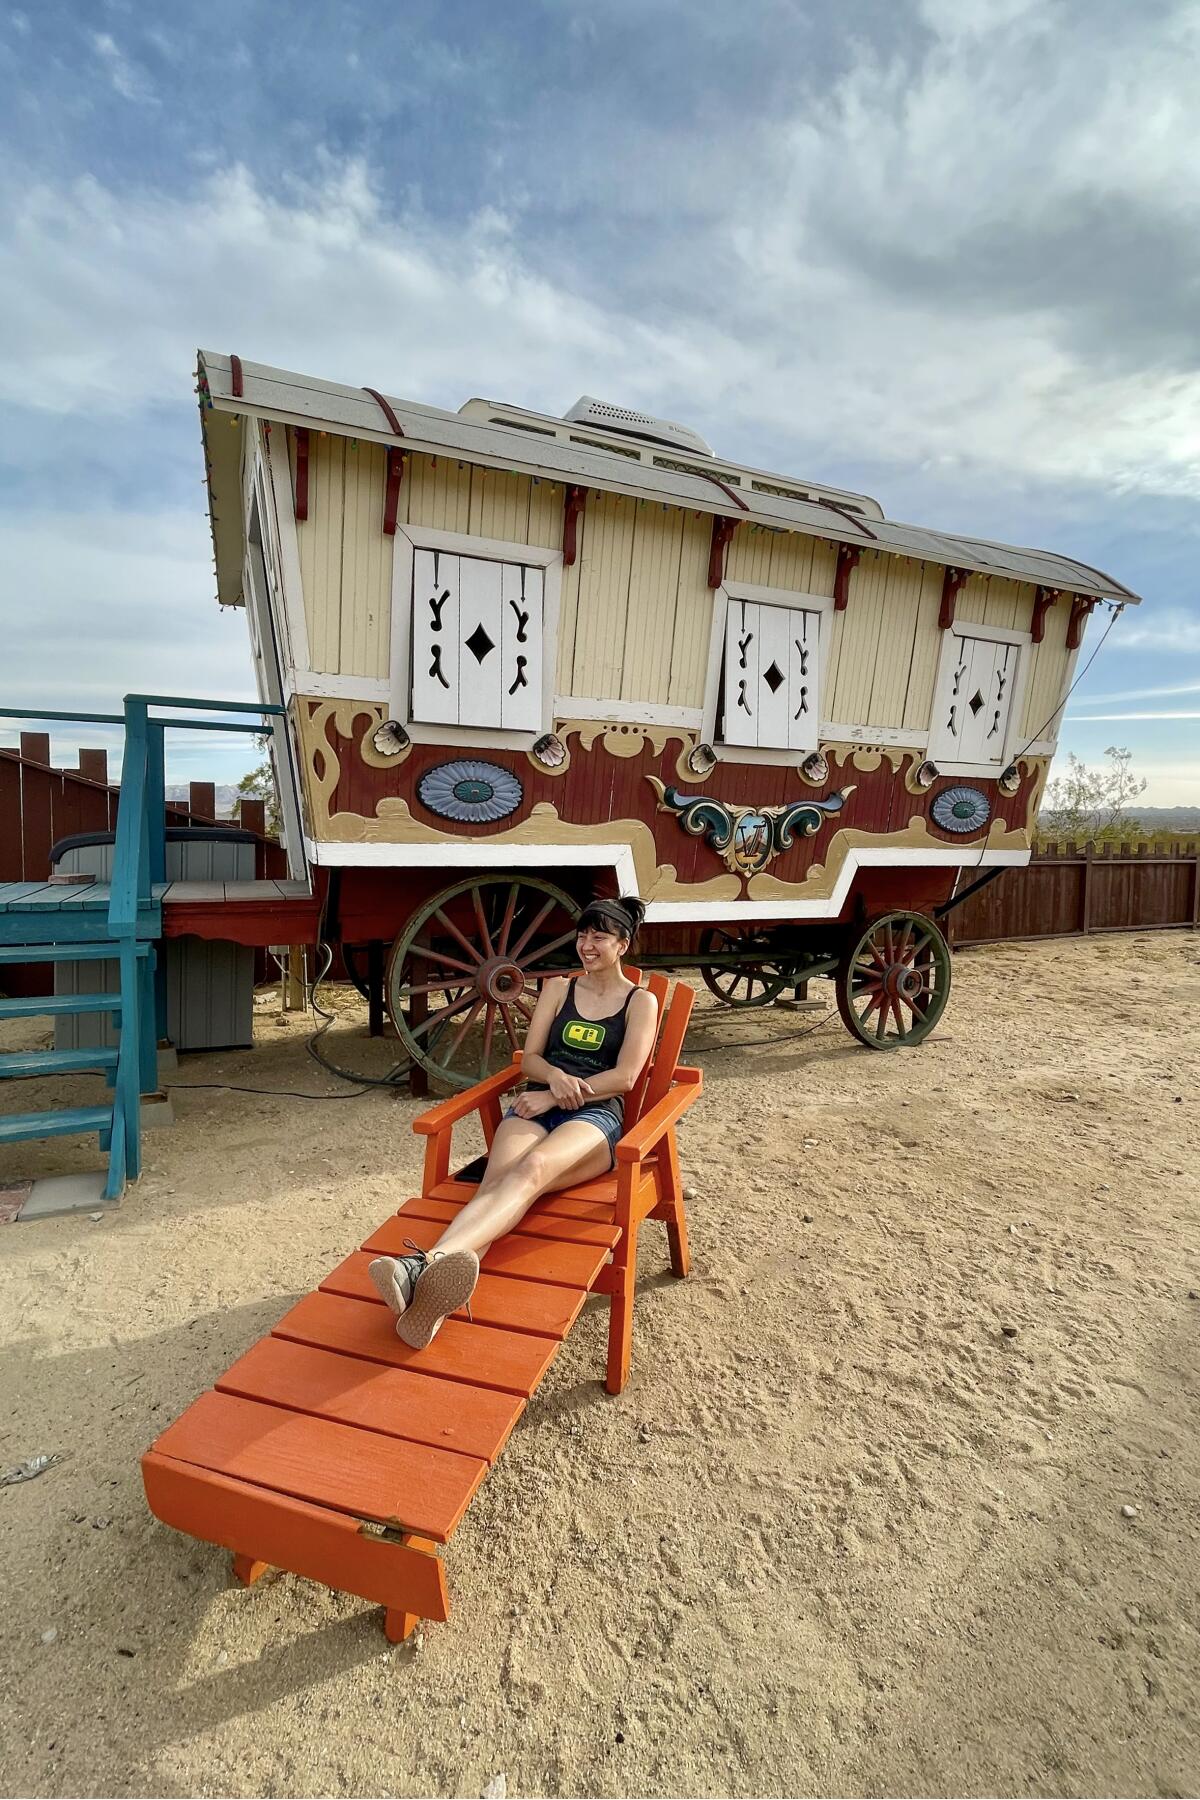 A woman relaxes on a lounge chair in front of a wagon.